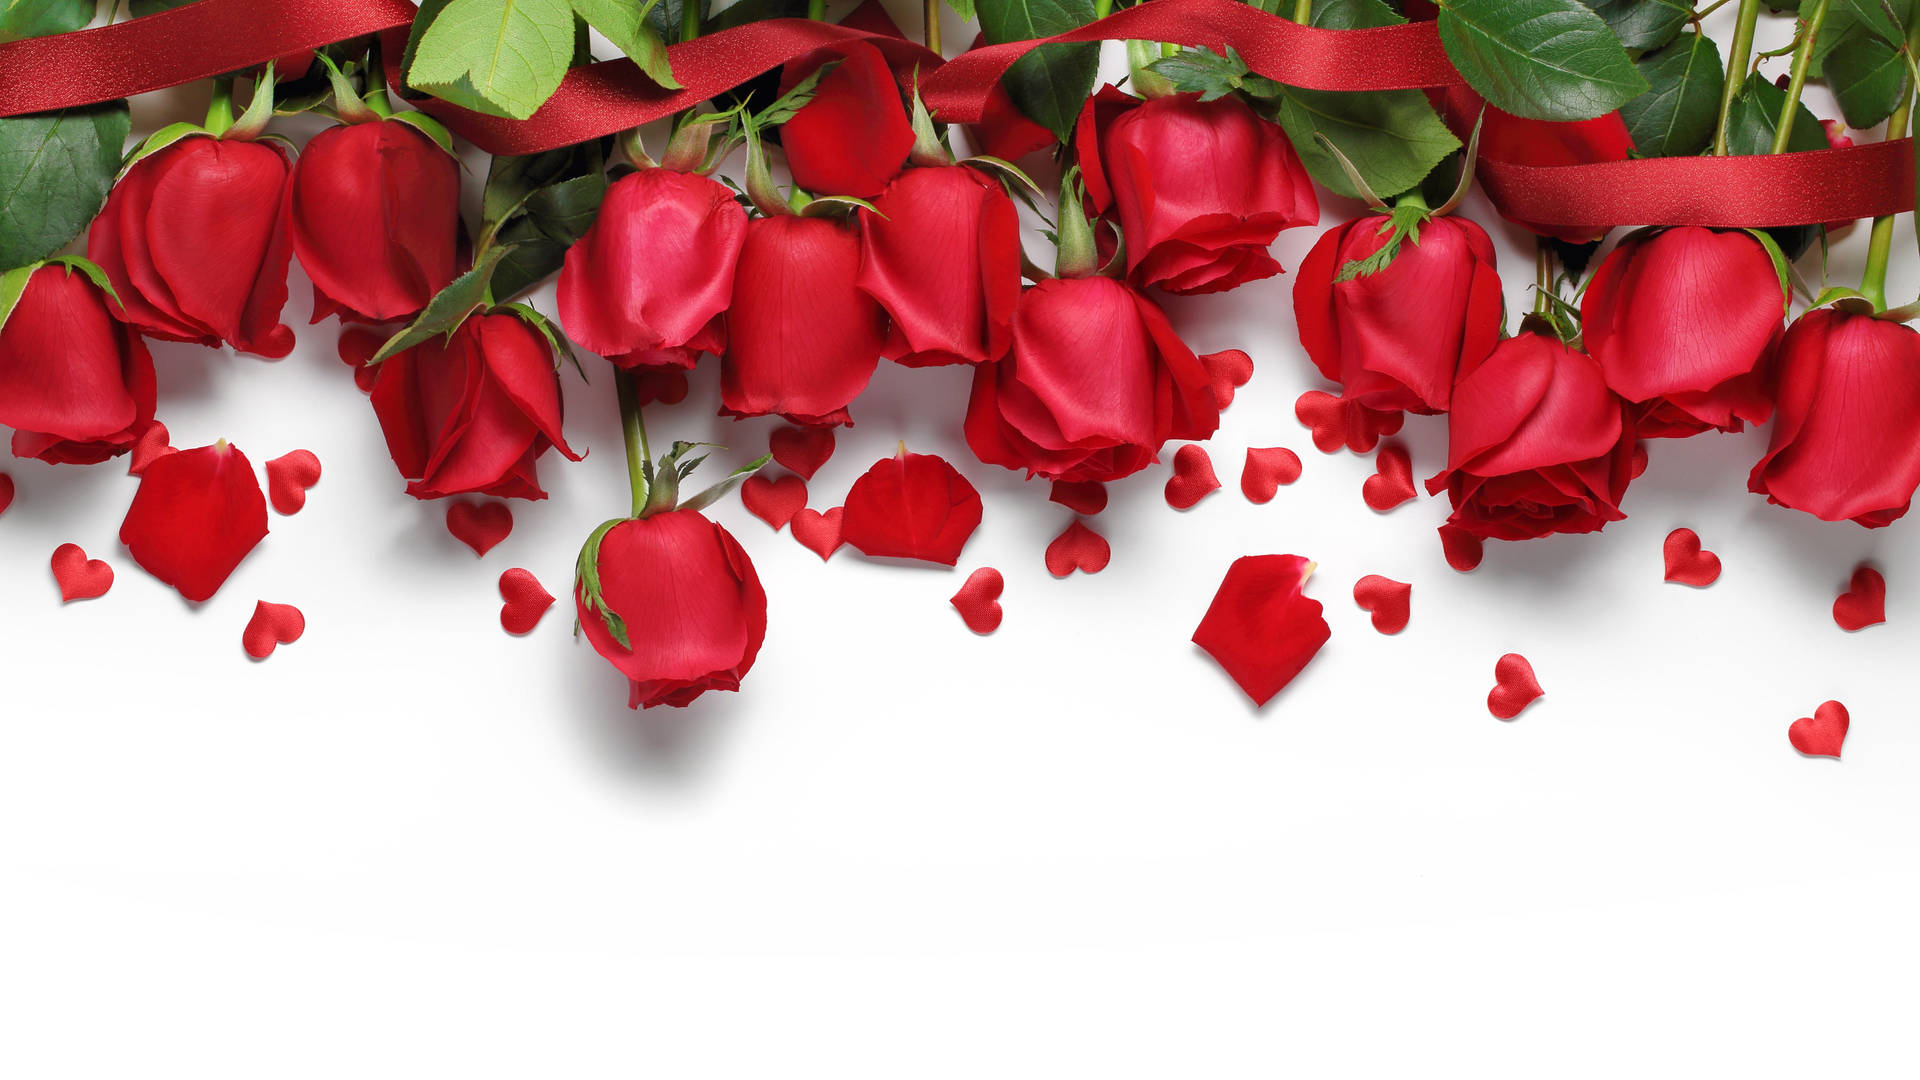 Red Roses Google Meet Virtual Background Picture